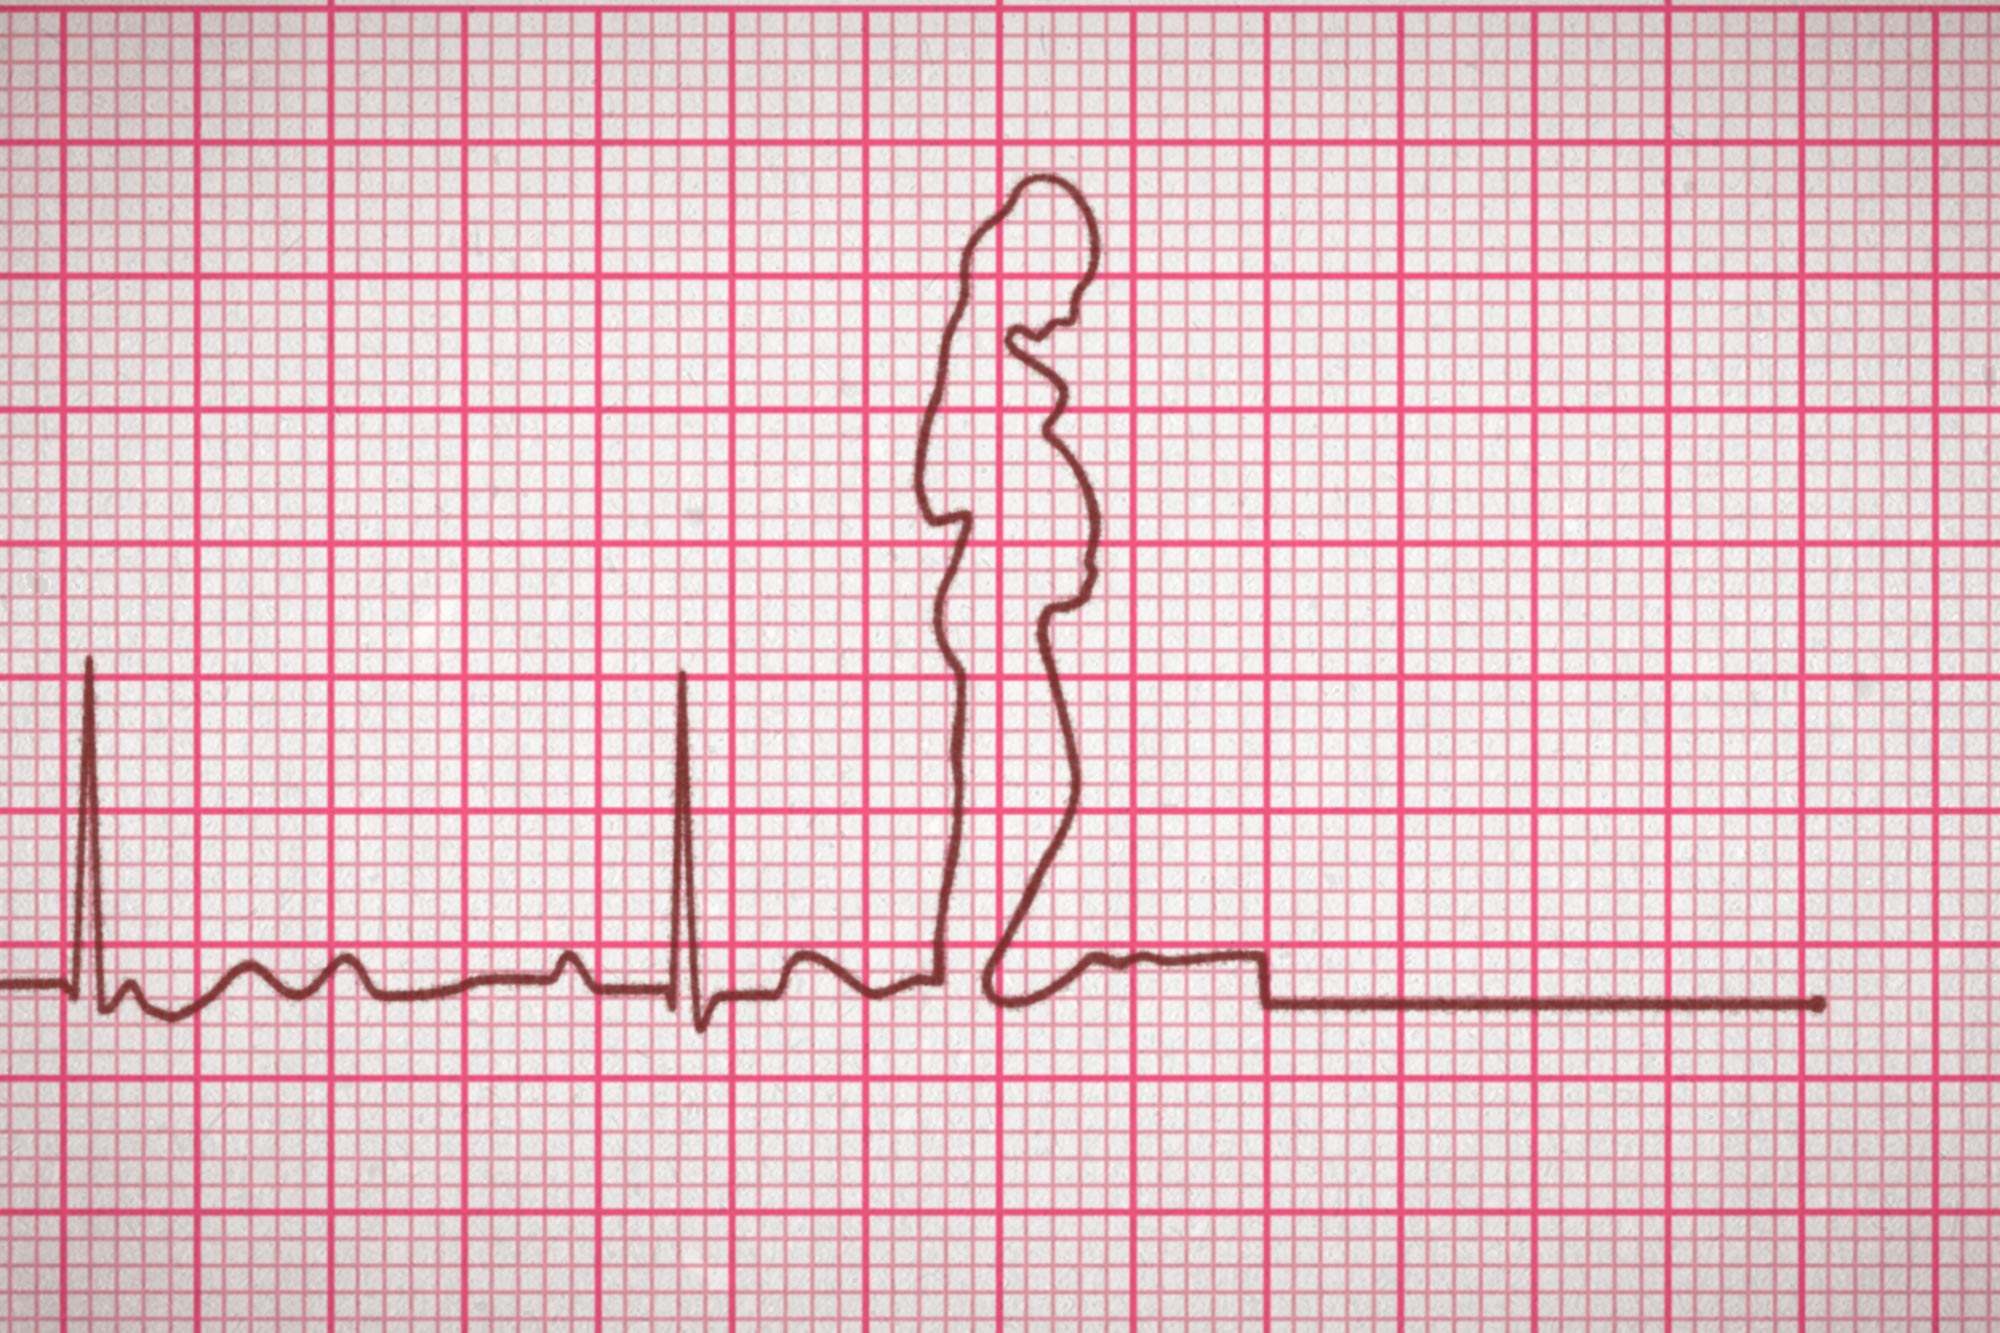 The spike of a heartbeat rendered on an EKG.